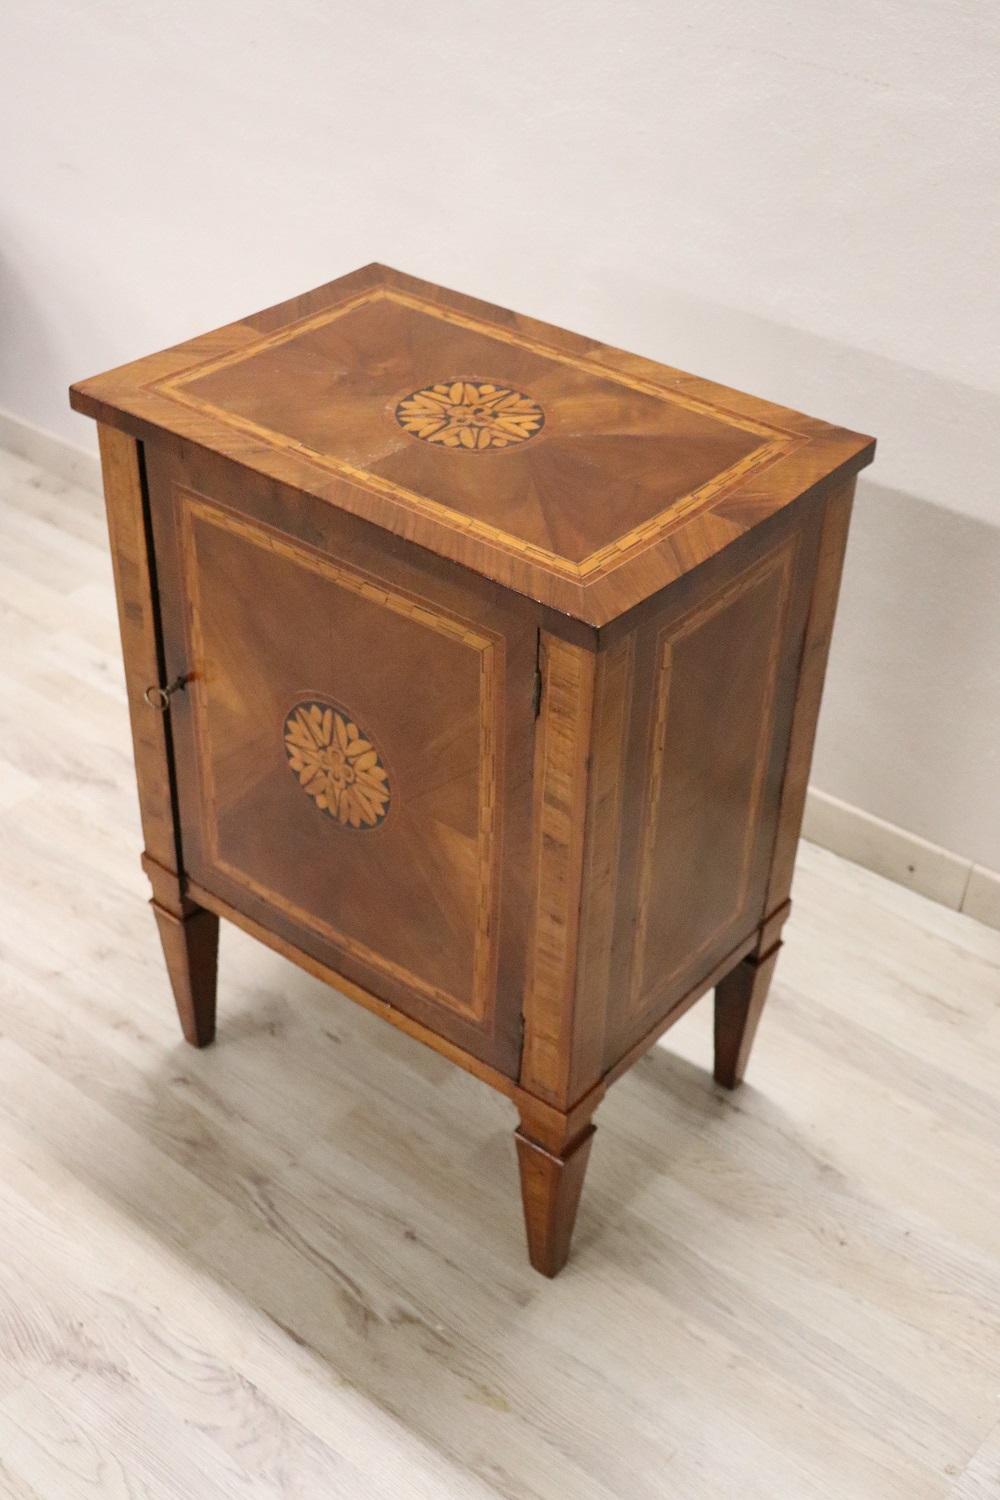 Important antique Italian Louis XVI large nightstand 1780s walnut wood. Inlaid decoration of geometric taste. On the front a large compartment available. In the 18th century only important families could afford to have furniture of this value. This